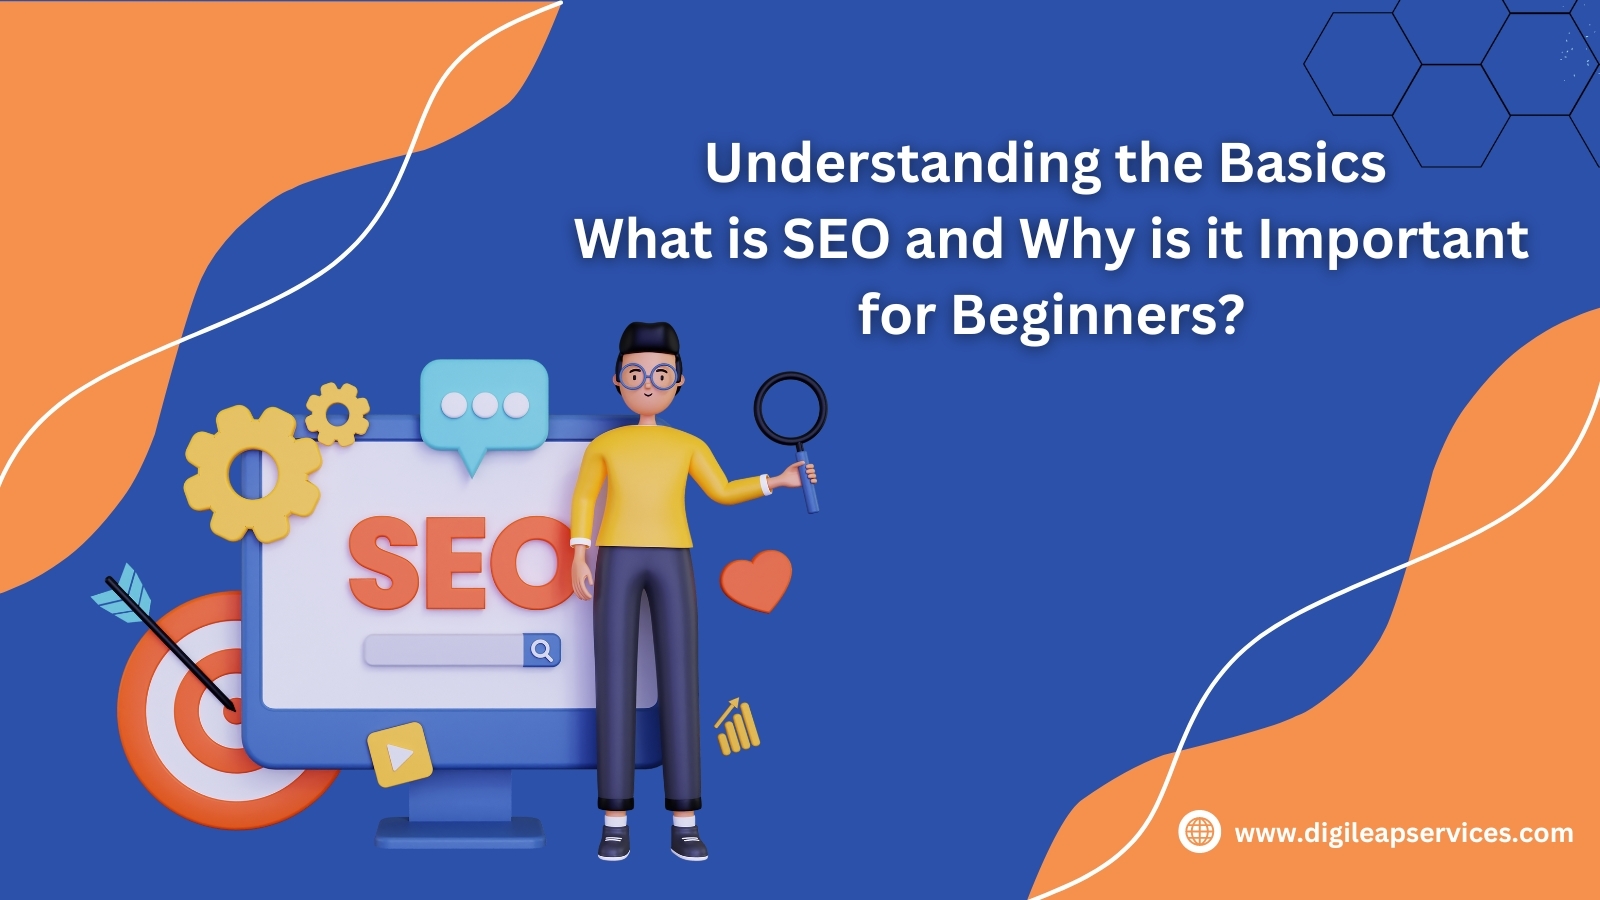 Understanding the Basics: What is SEO and Why is it Important for Beginners?